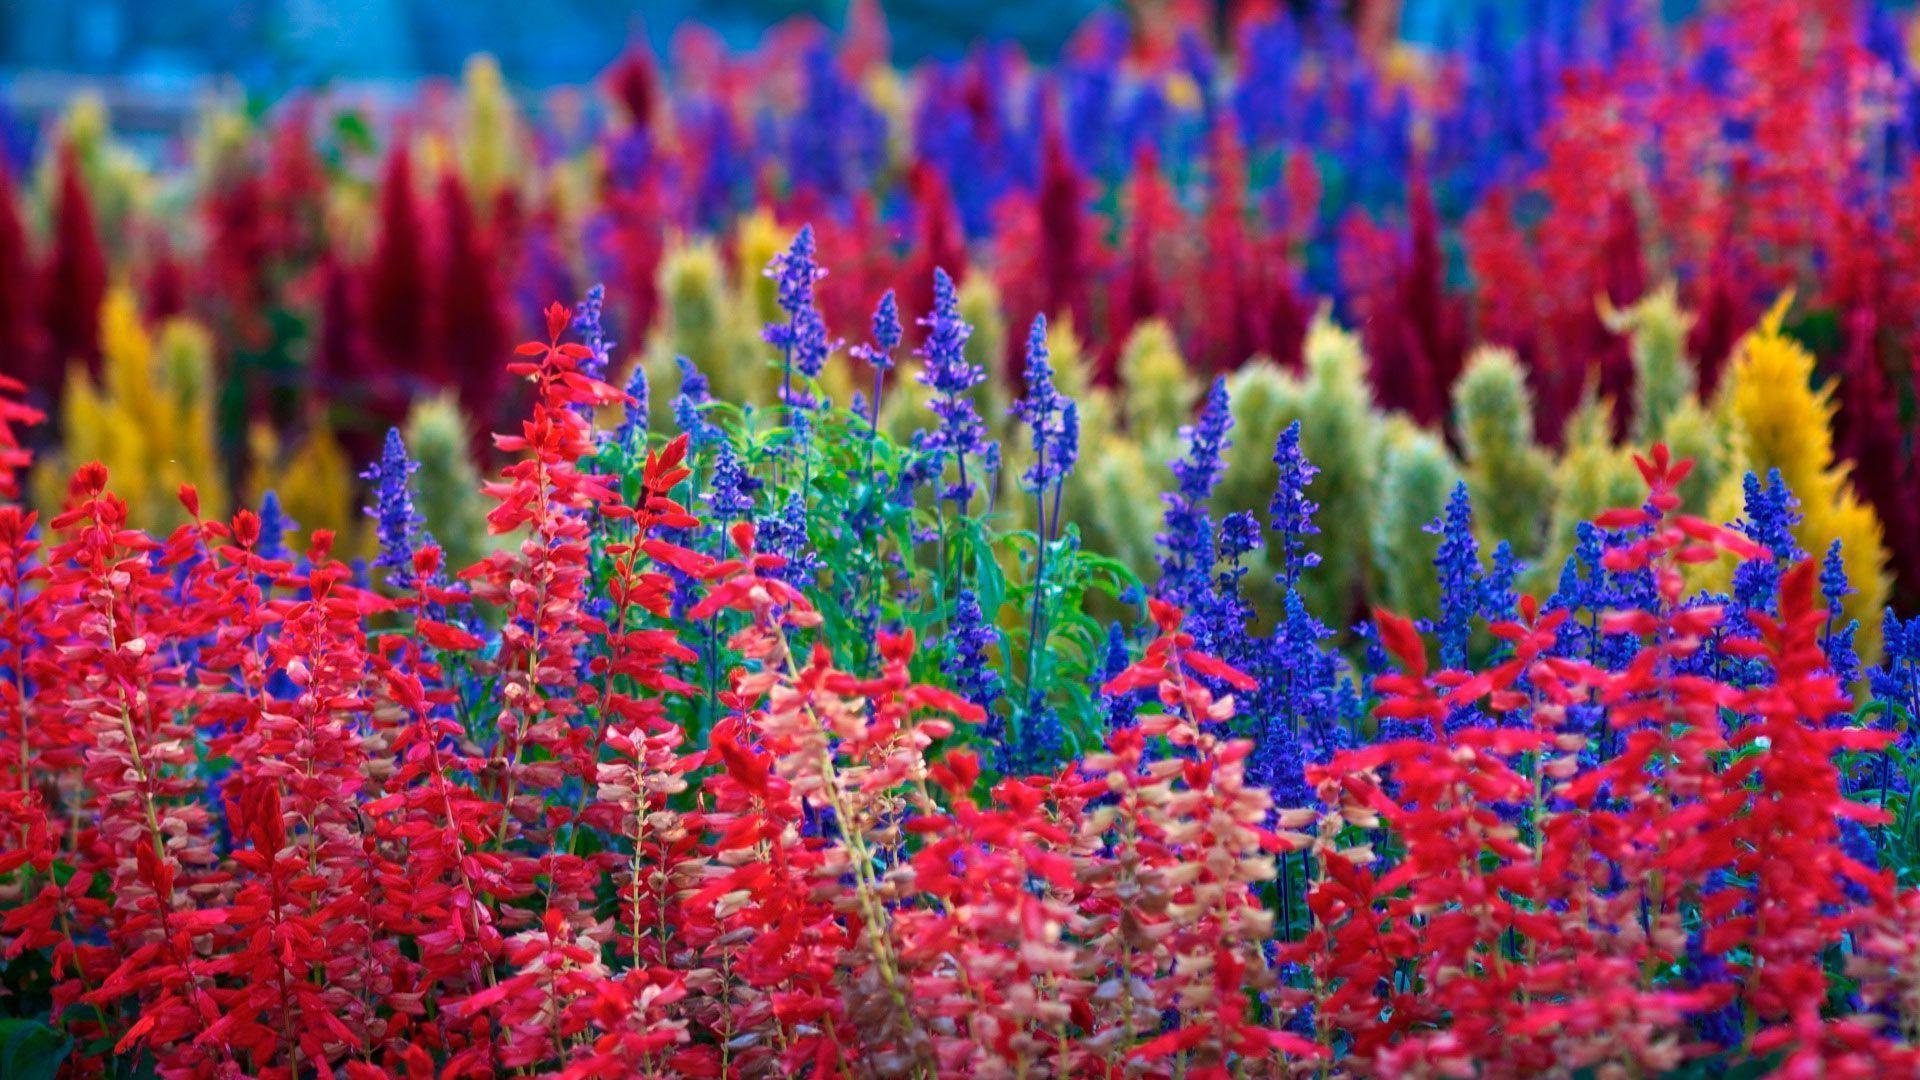 Colorful Flowers Wallpaper 16870 1920x1080 px